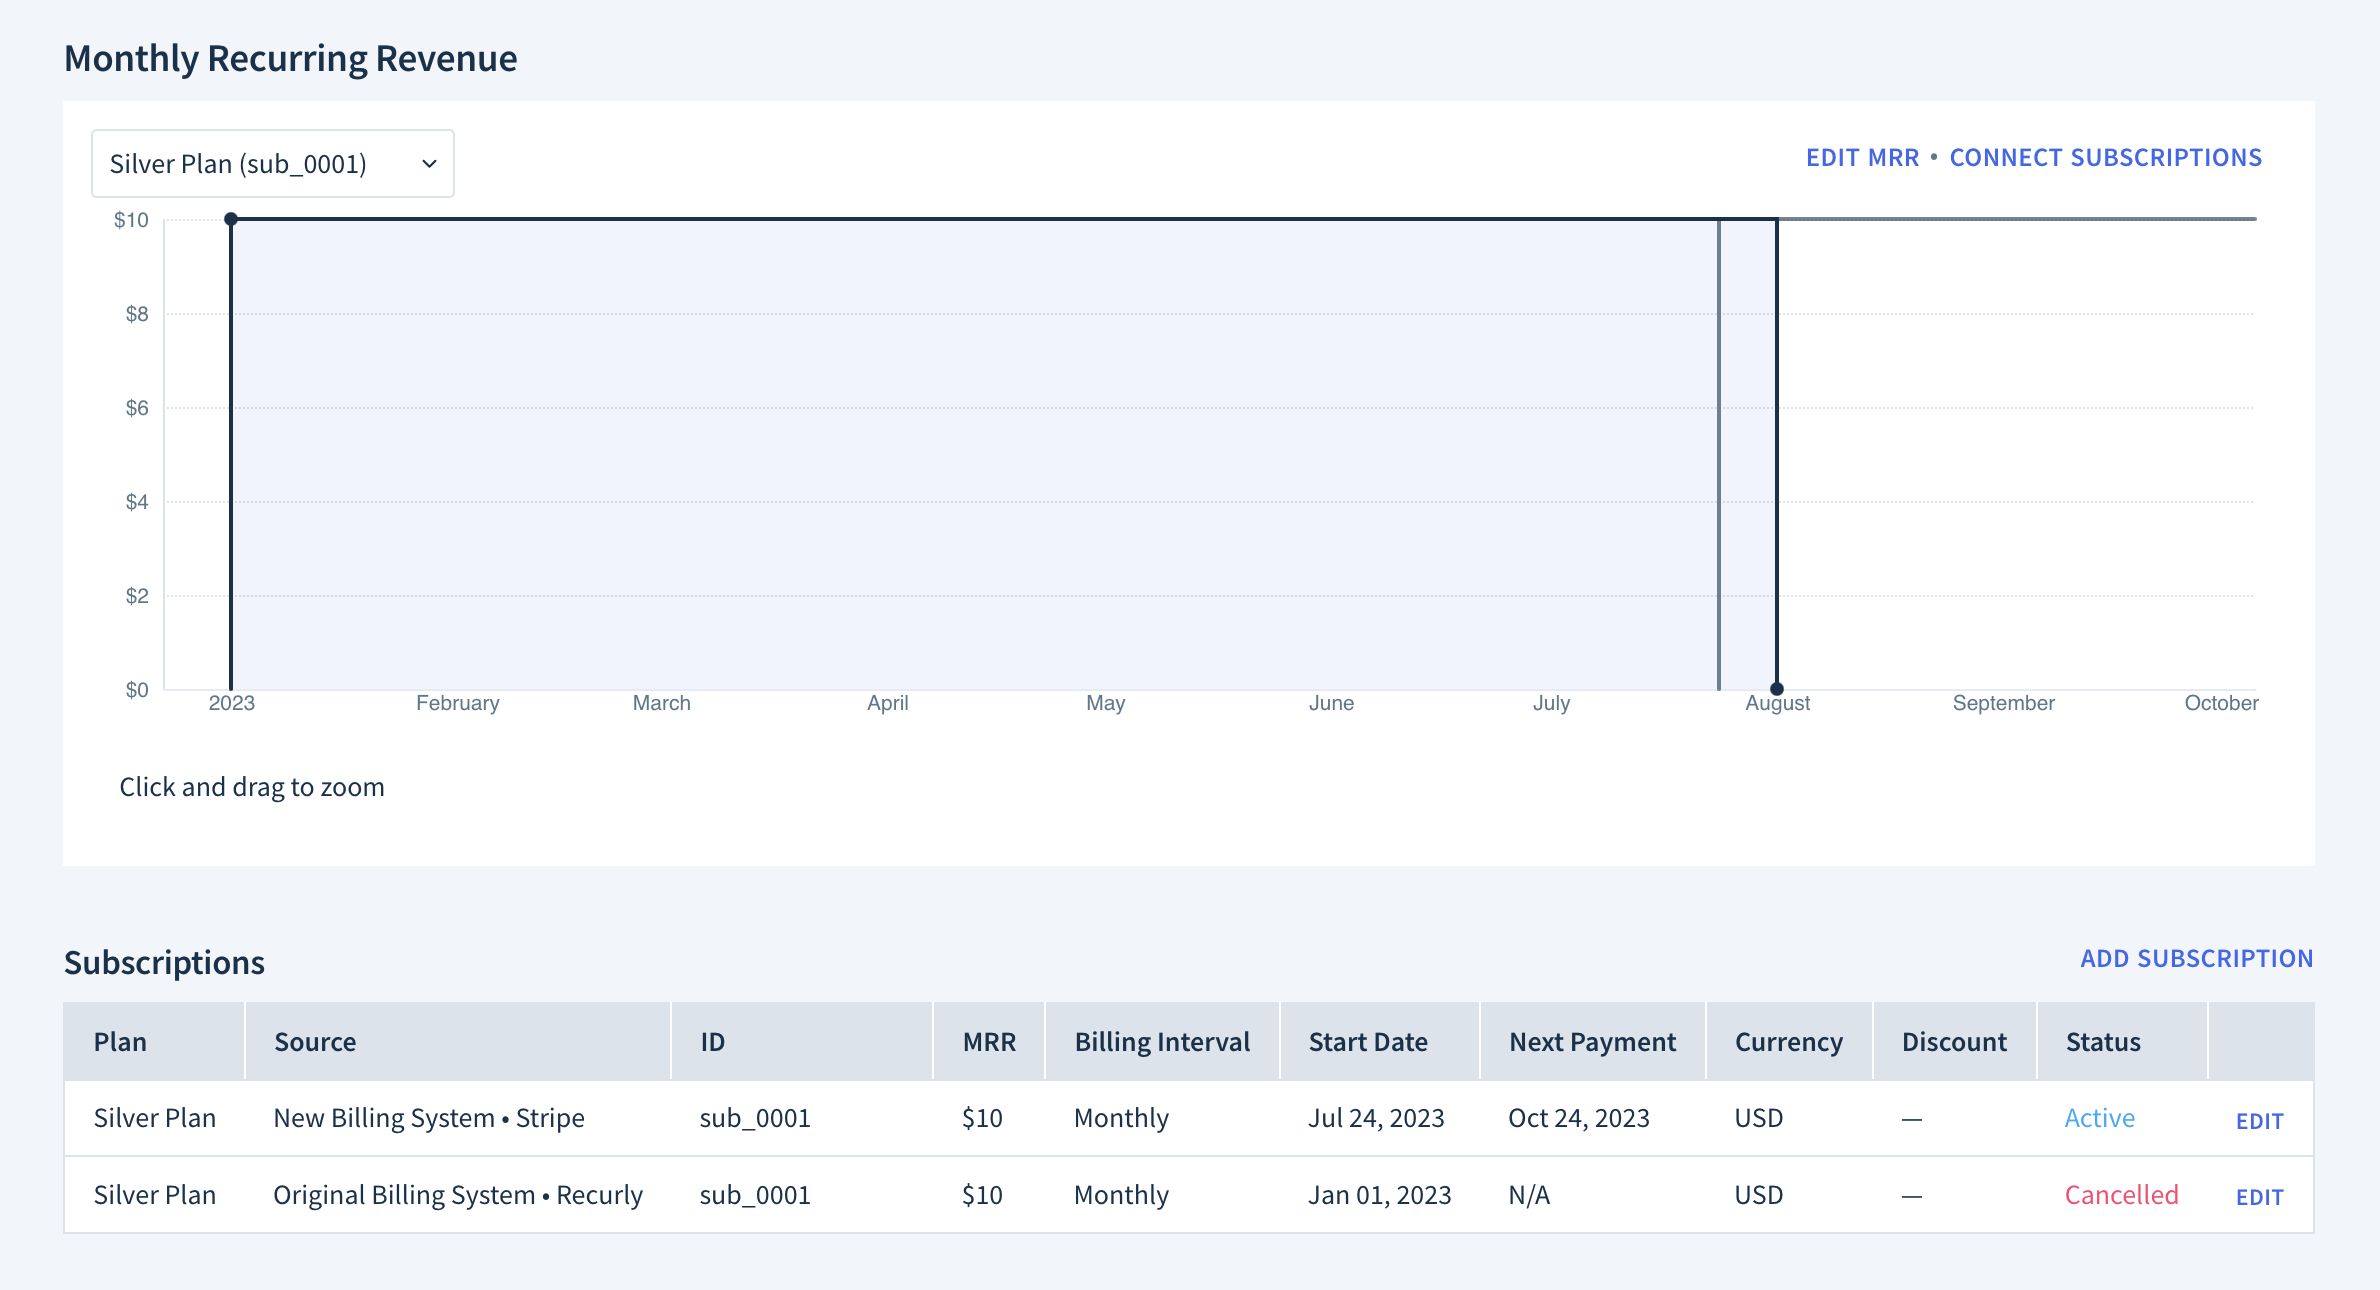 Screenshot of the Monthly Recurring Revenue chart and Subscriptions table showing two subscriptions: one active from the new billing system, and one canceled from the original billing system.